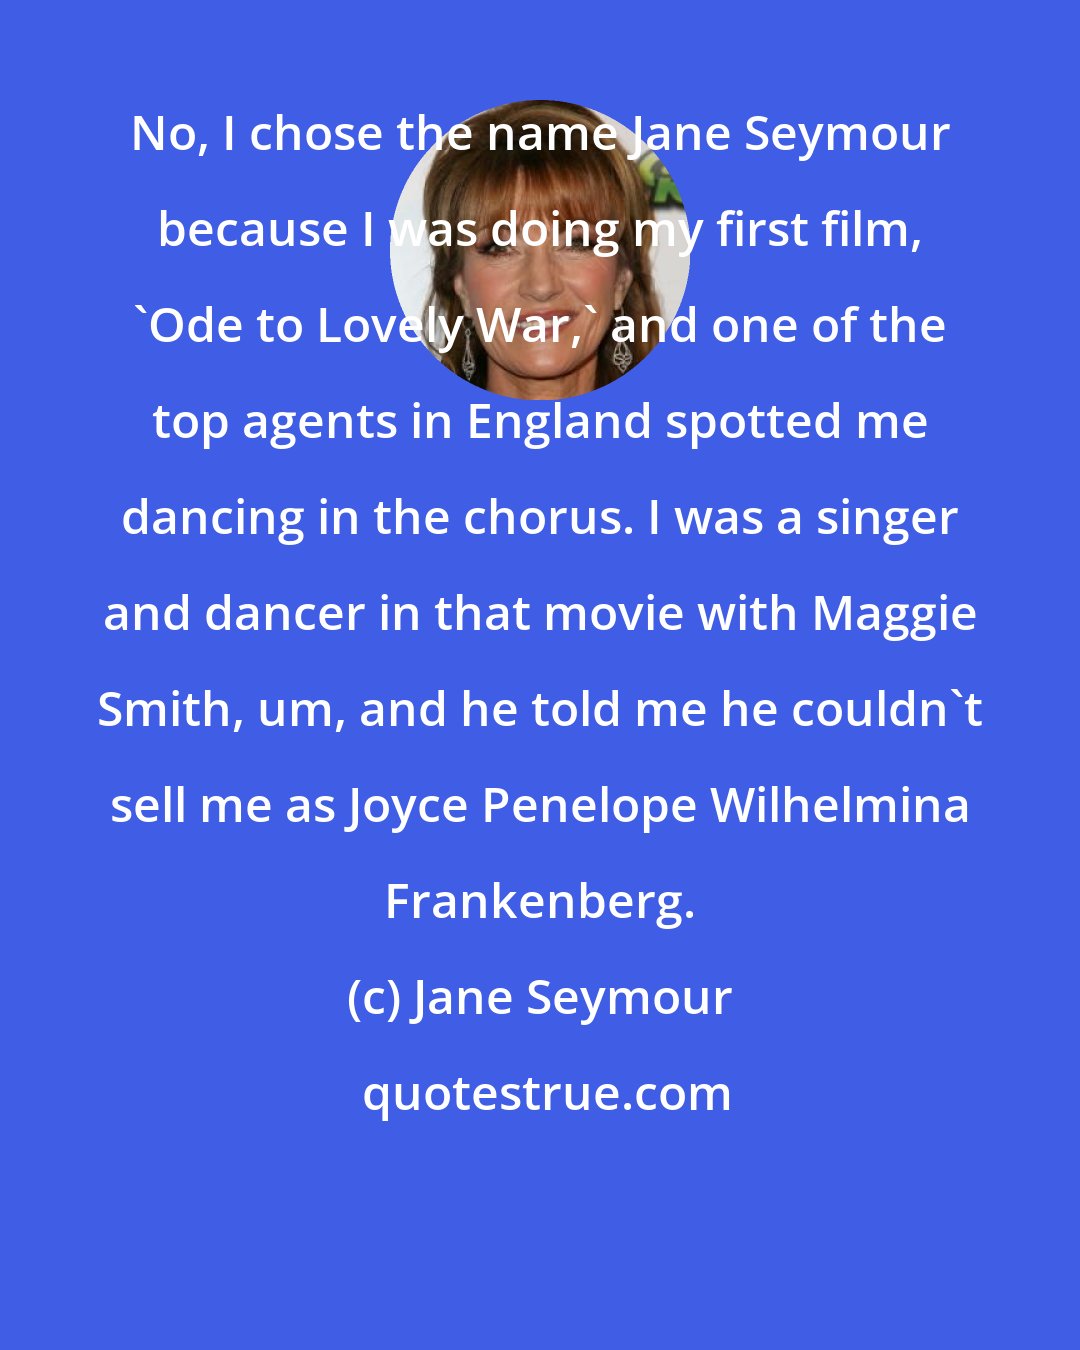 Jane Seymour: No, I chose the name Jane Seymour because I was doing my first film, 'Ode to Lovely War,' and one of the top agents in England spotted me dancing in the chorus. I was a singer and dancer in that movie with Maggie Smith, um, and he told me he couldn't sell me as Joyce Penelope Wilhelmina Frankenberg.